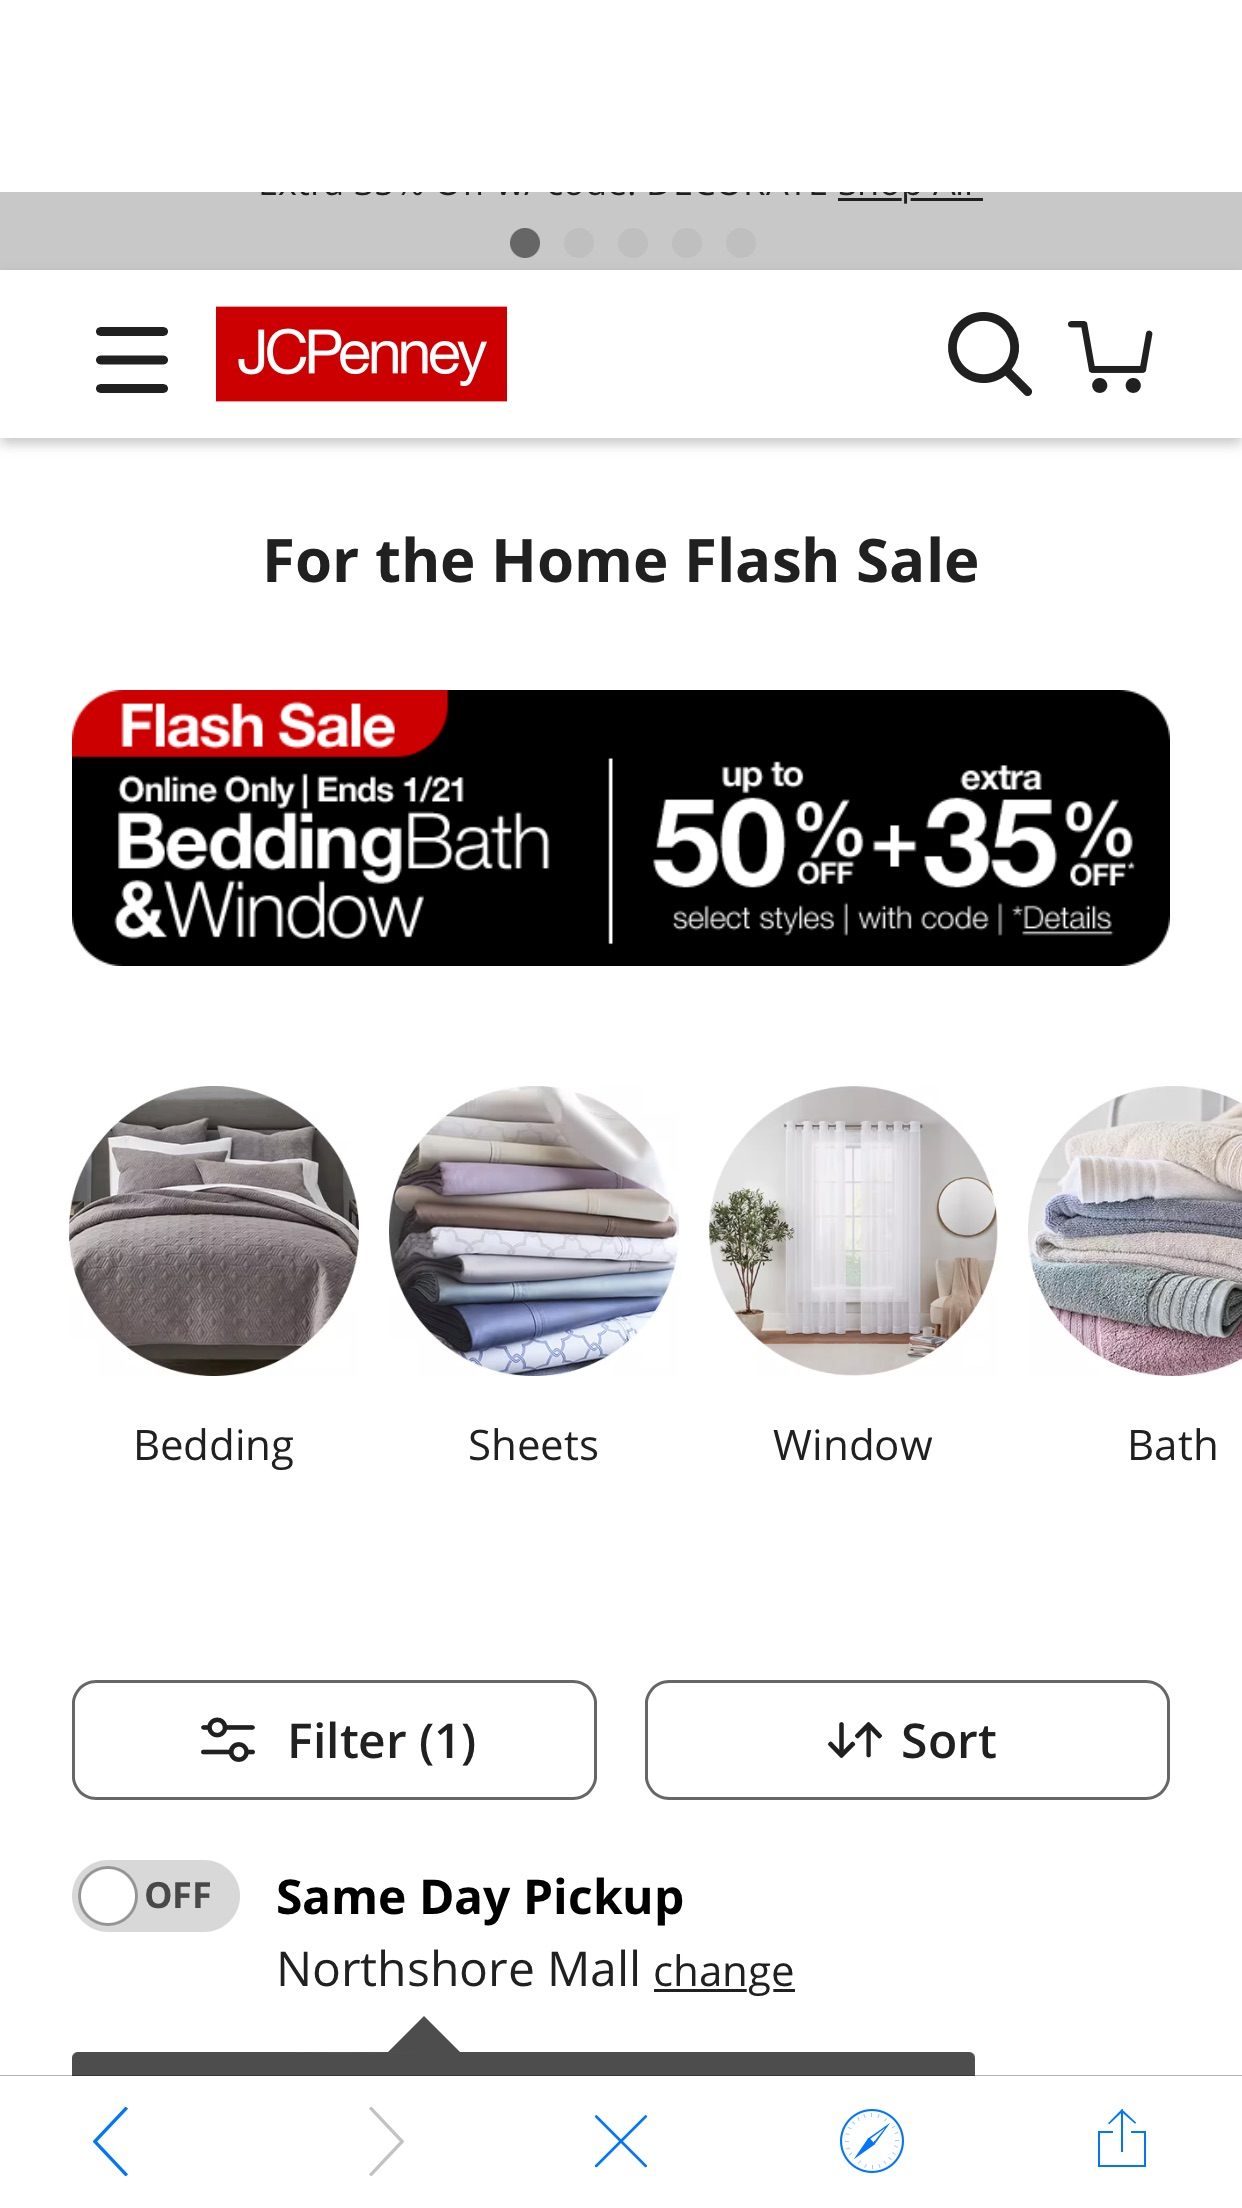 FLASH SALE! BeddingBath&Window Up to 50% Off + Extra 35% Off, Code: DECORATE